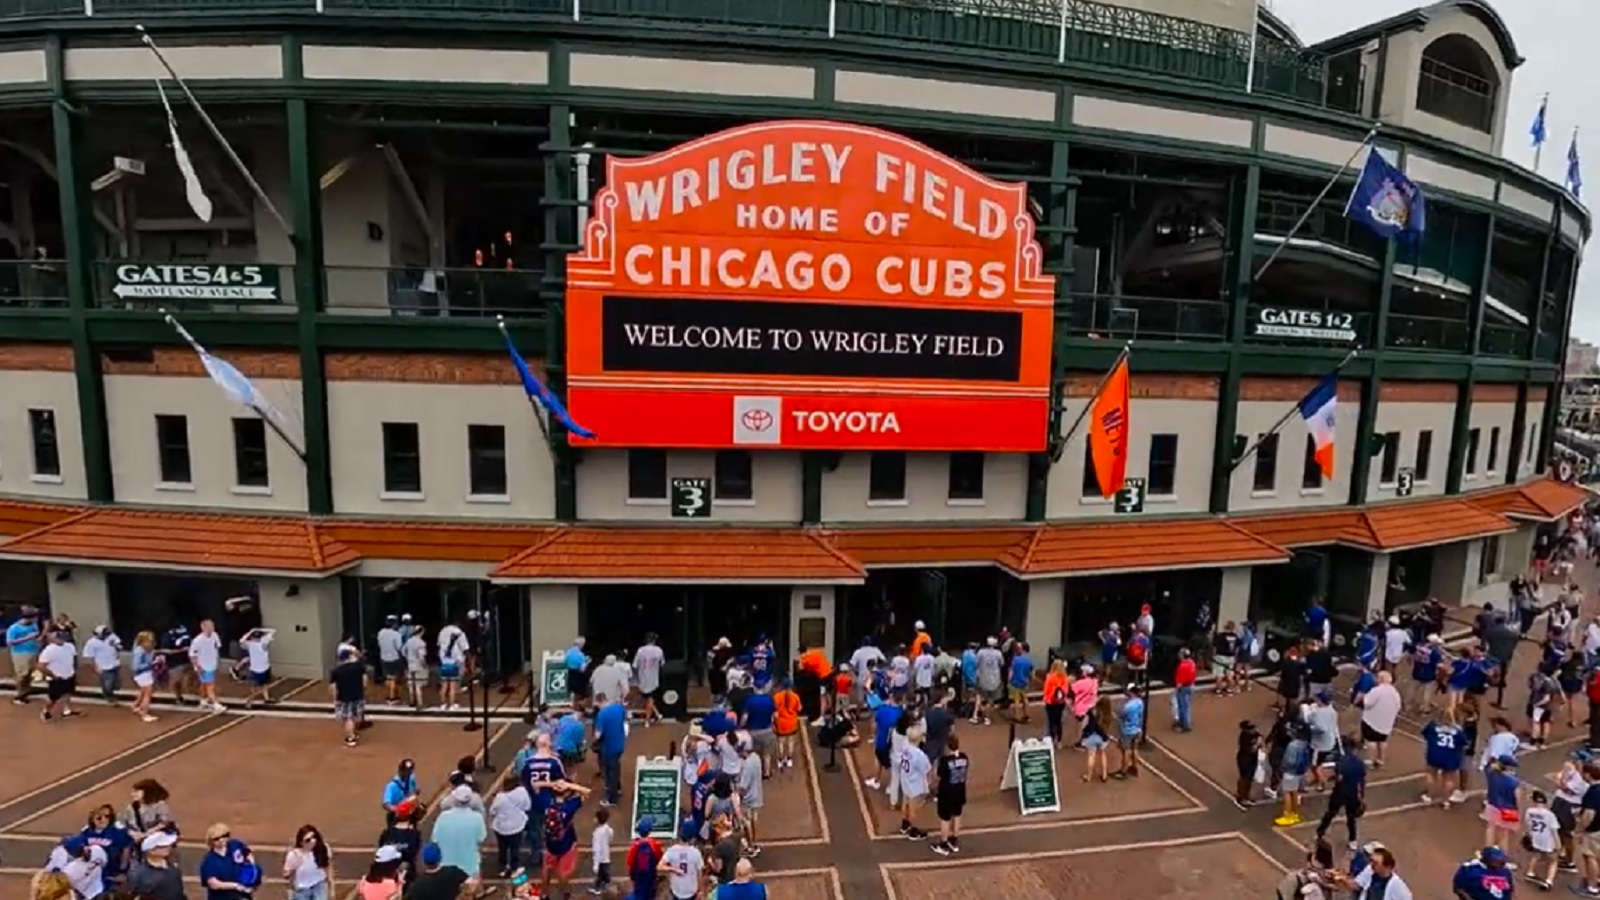 Amazing drone video tour of Wrigley Field goes viral